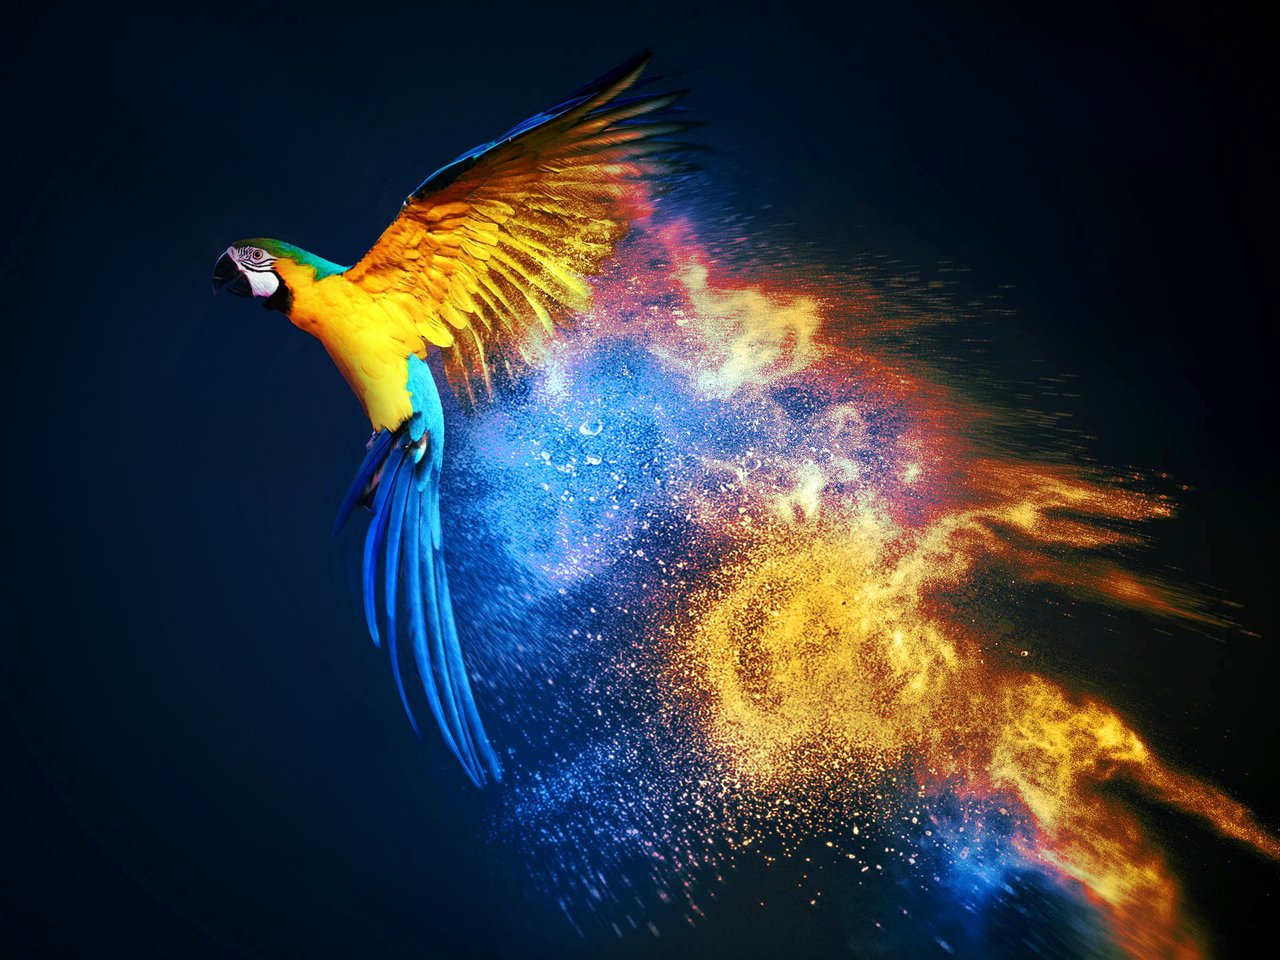 Parrot Wallpapers